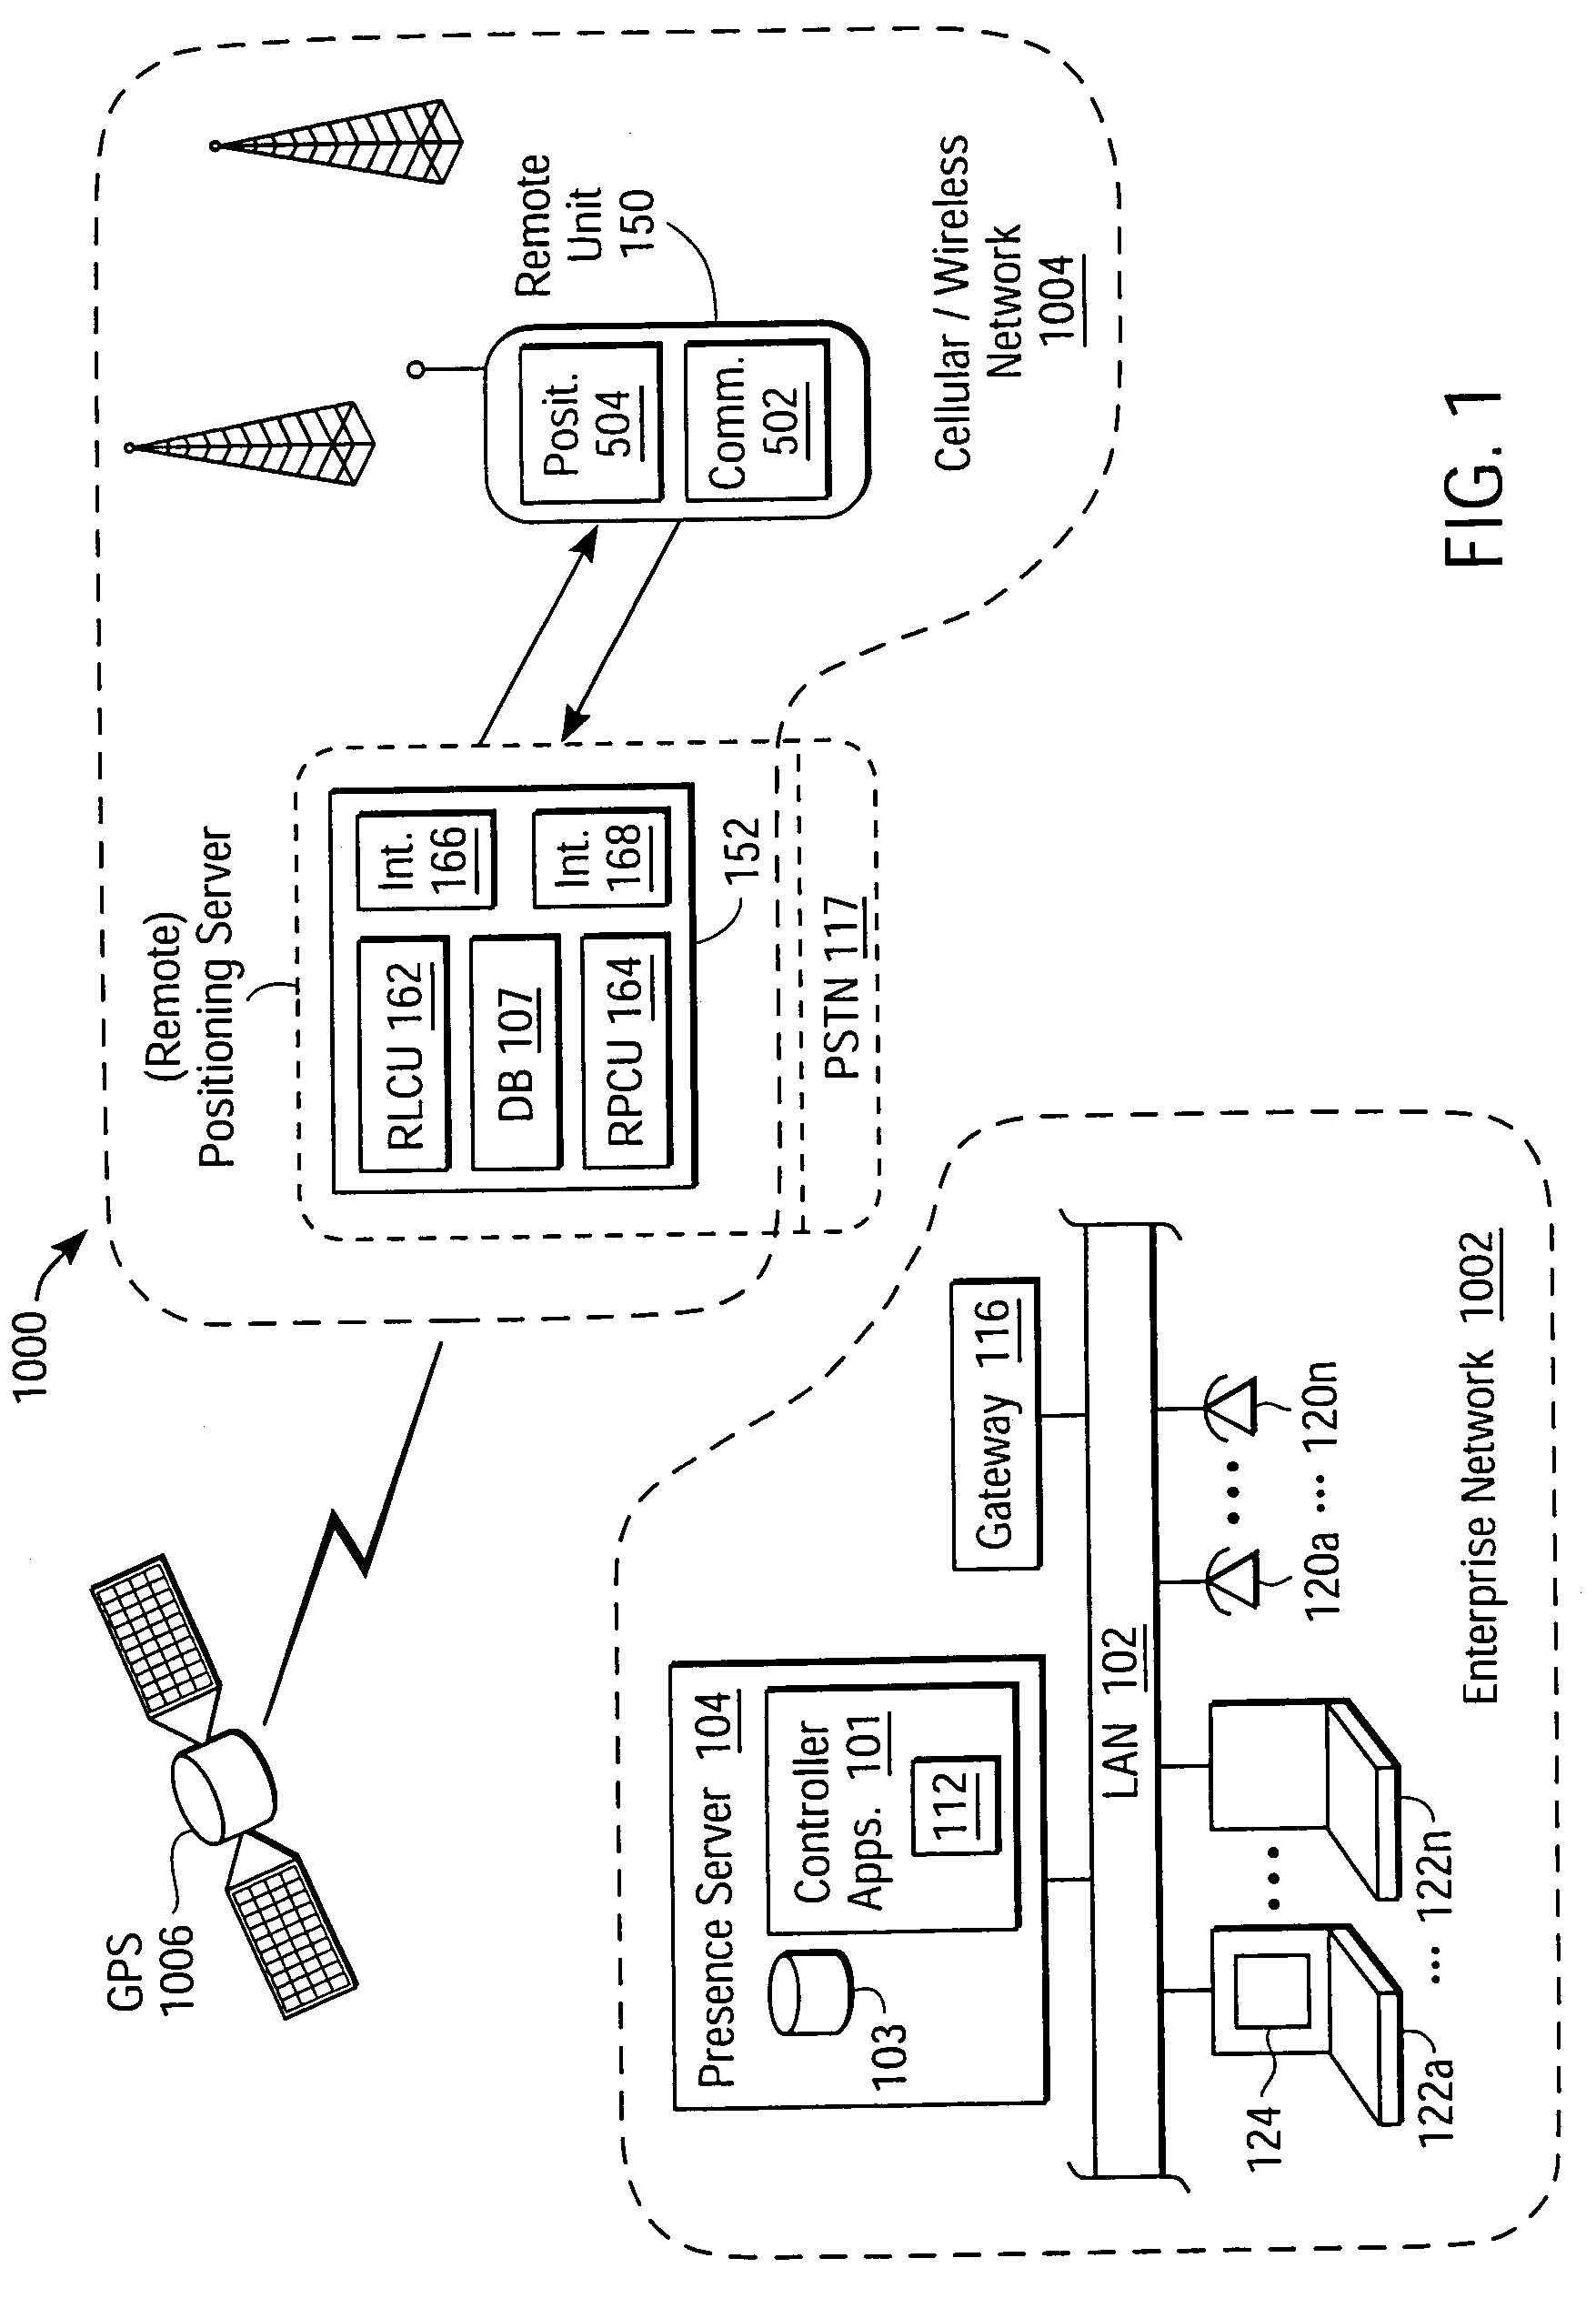 System and method for web-based presence perimeter rule monitoring